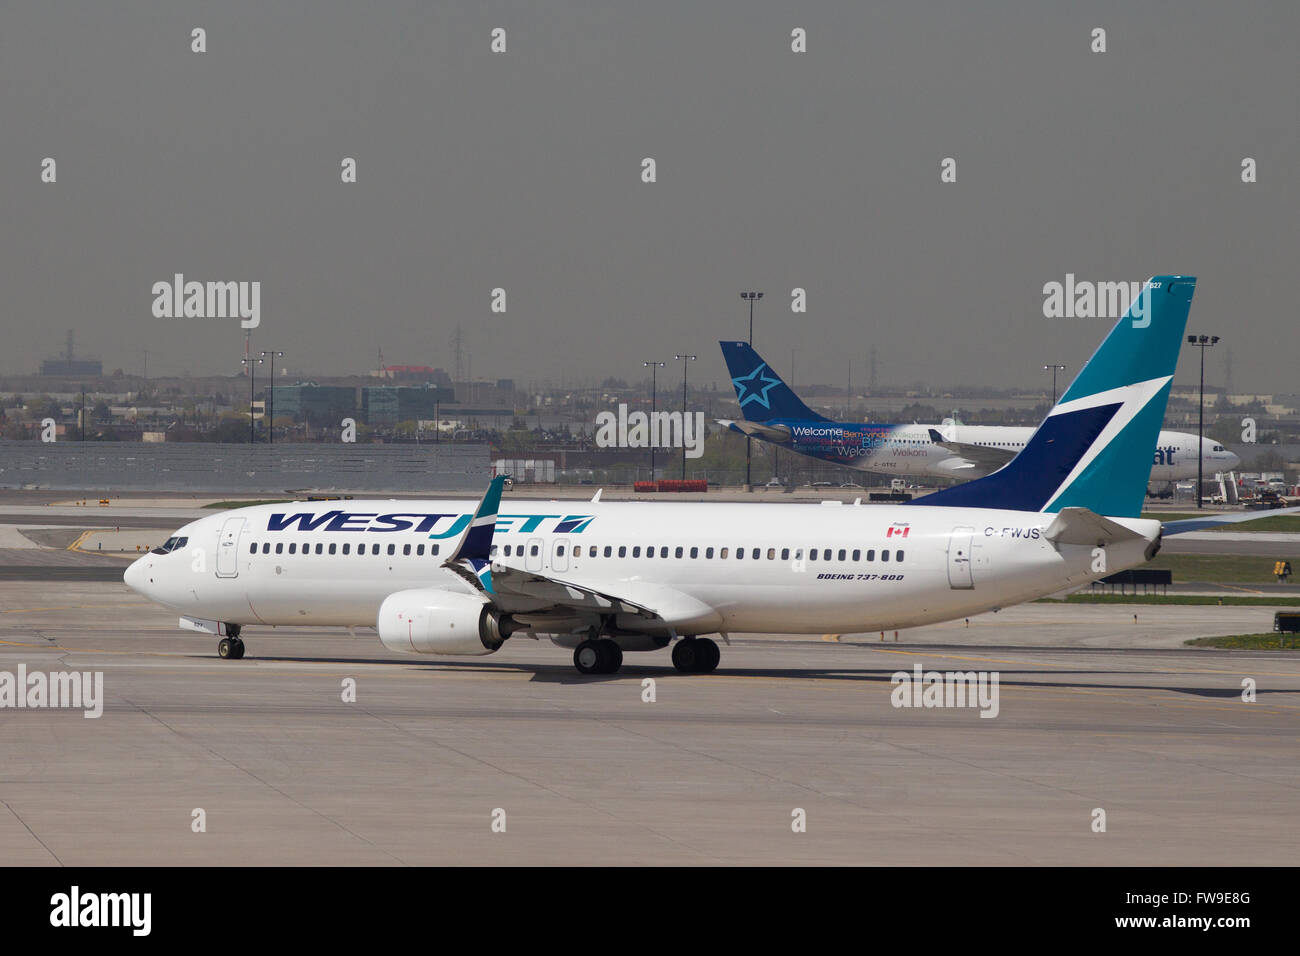 A Westjet aircraft waits to be loaded before departing from Pearson International airport in Toronto, Ontario on May 7, 2015. Stock Photo